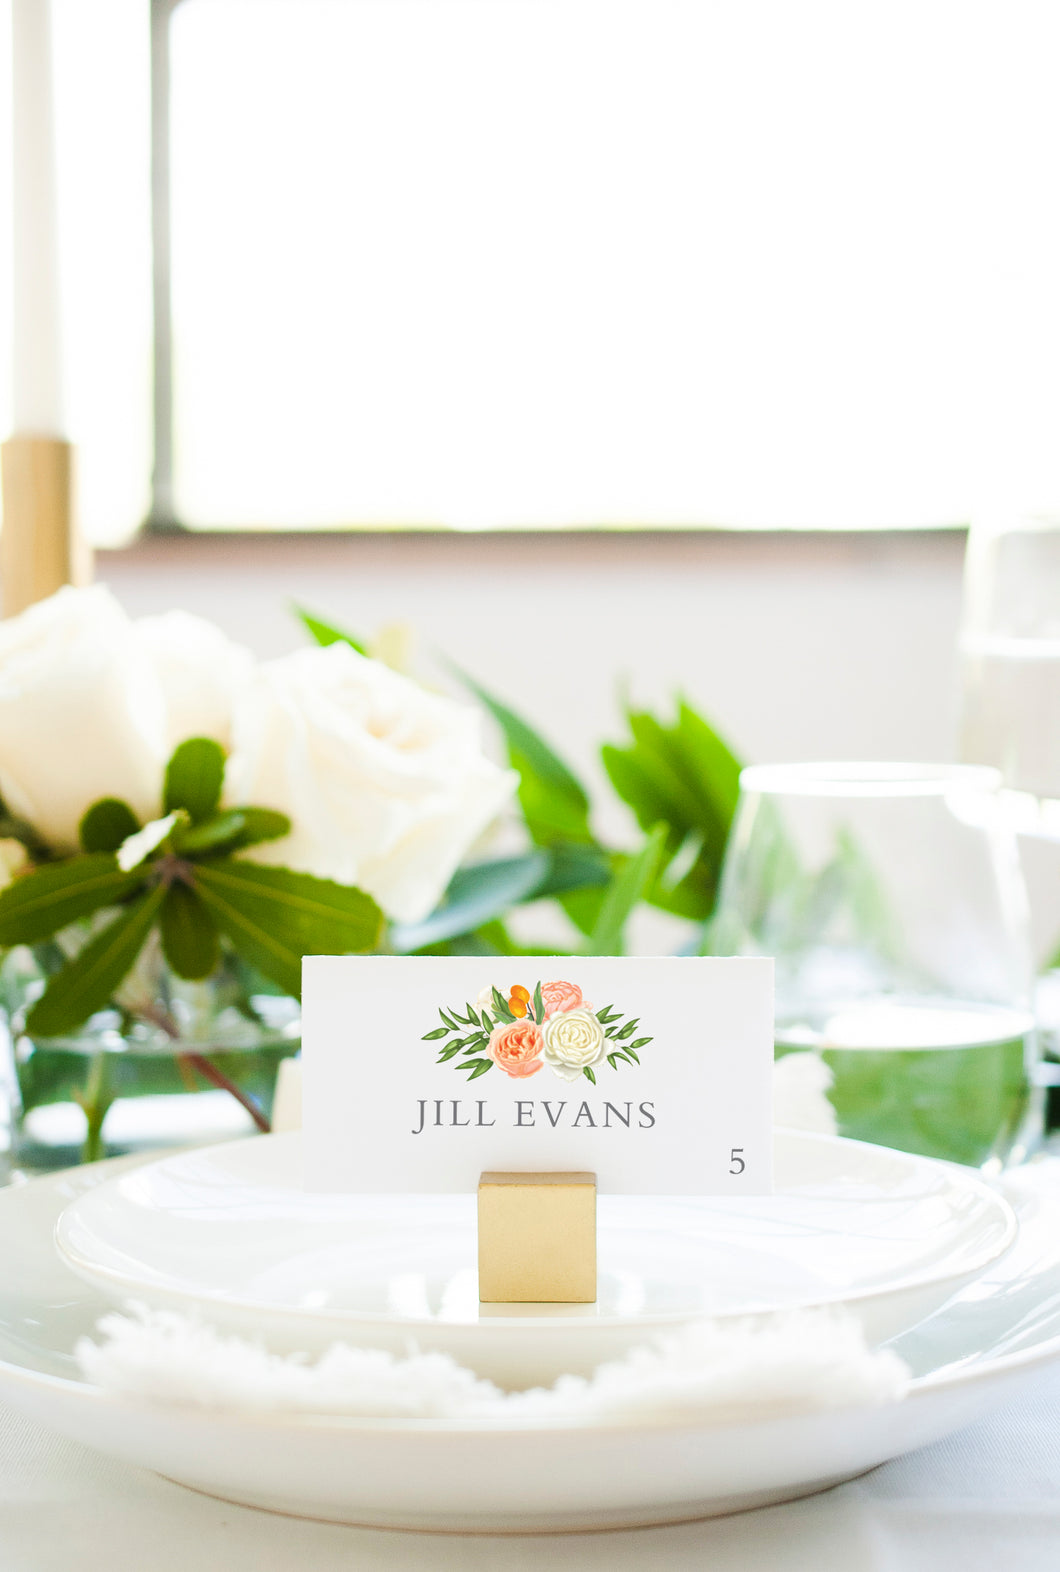 Spring Floral and Citrus Wedding Place Cards